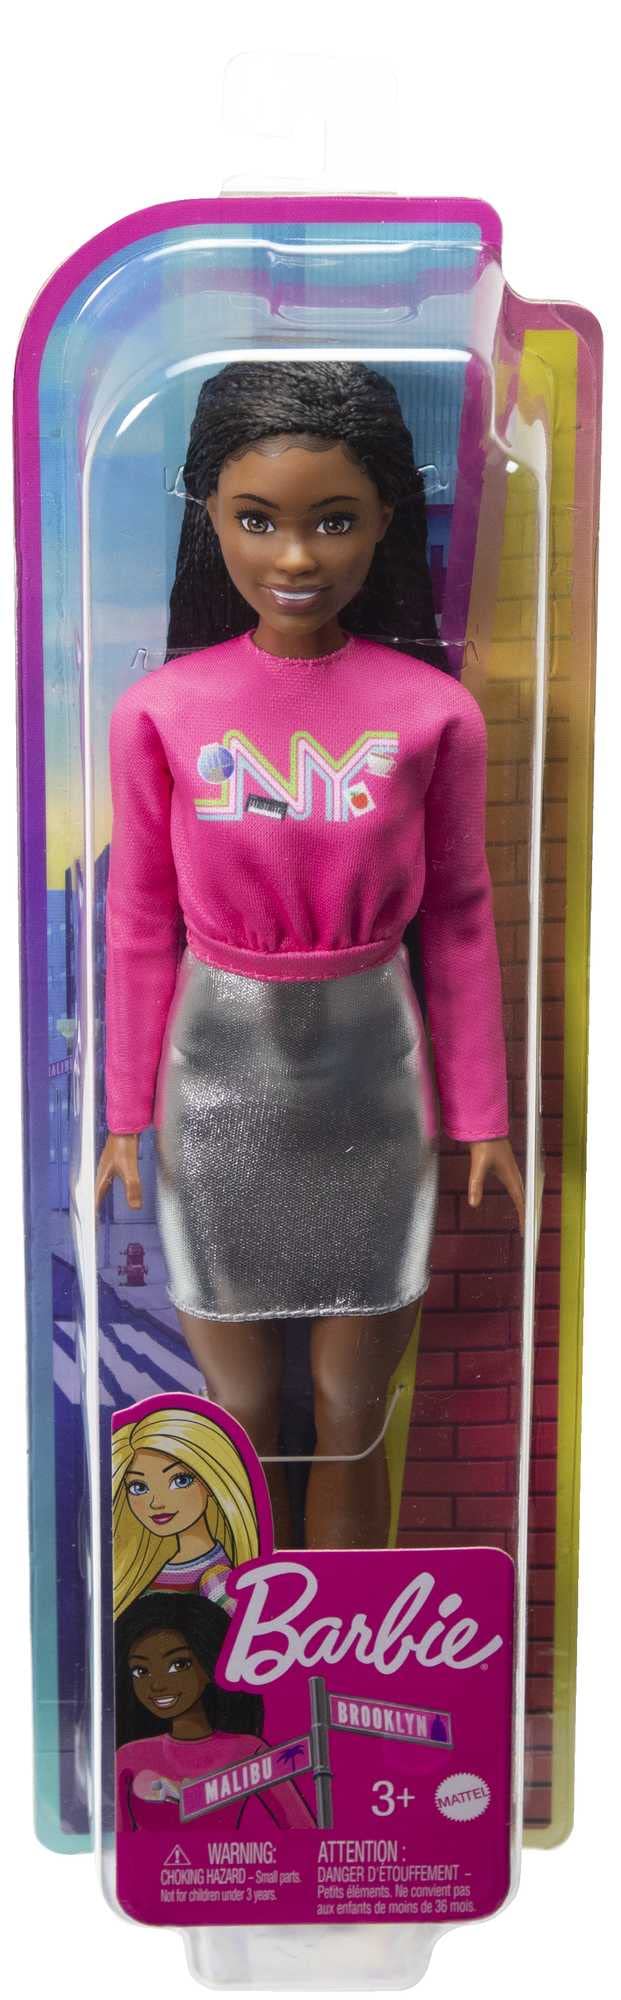 Barbie It Takes Two Doll, Brooklyn Fashion Doll with Braided Hair, Pink Nyc Shirt, Metallic Skirt & White Shoes